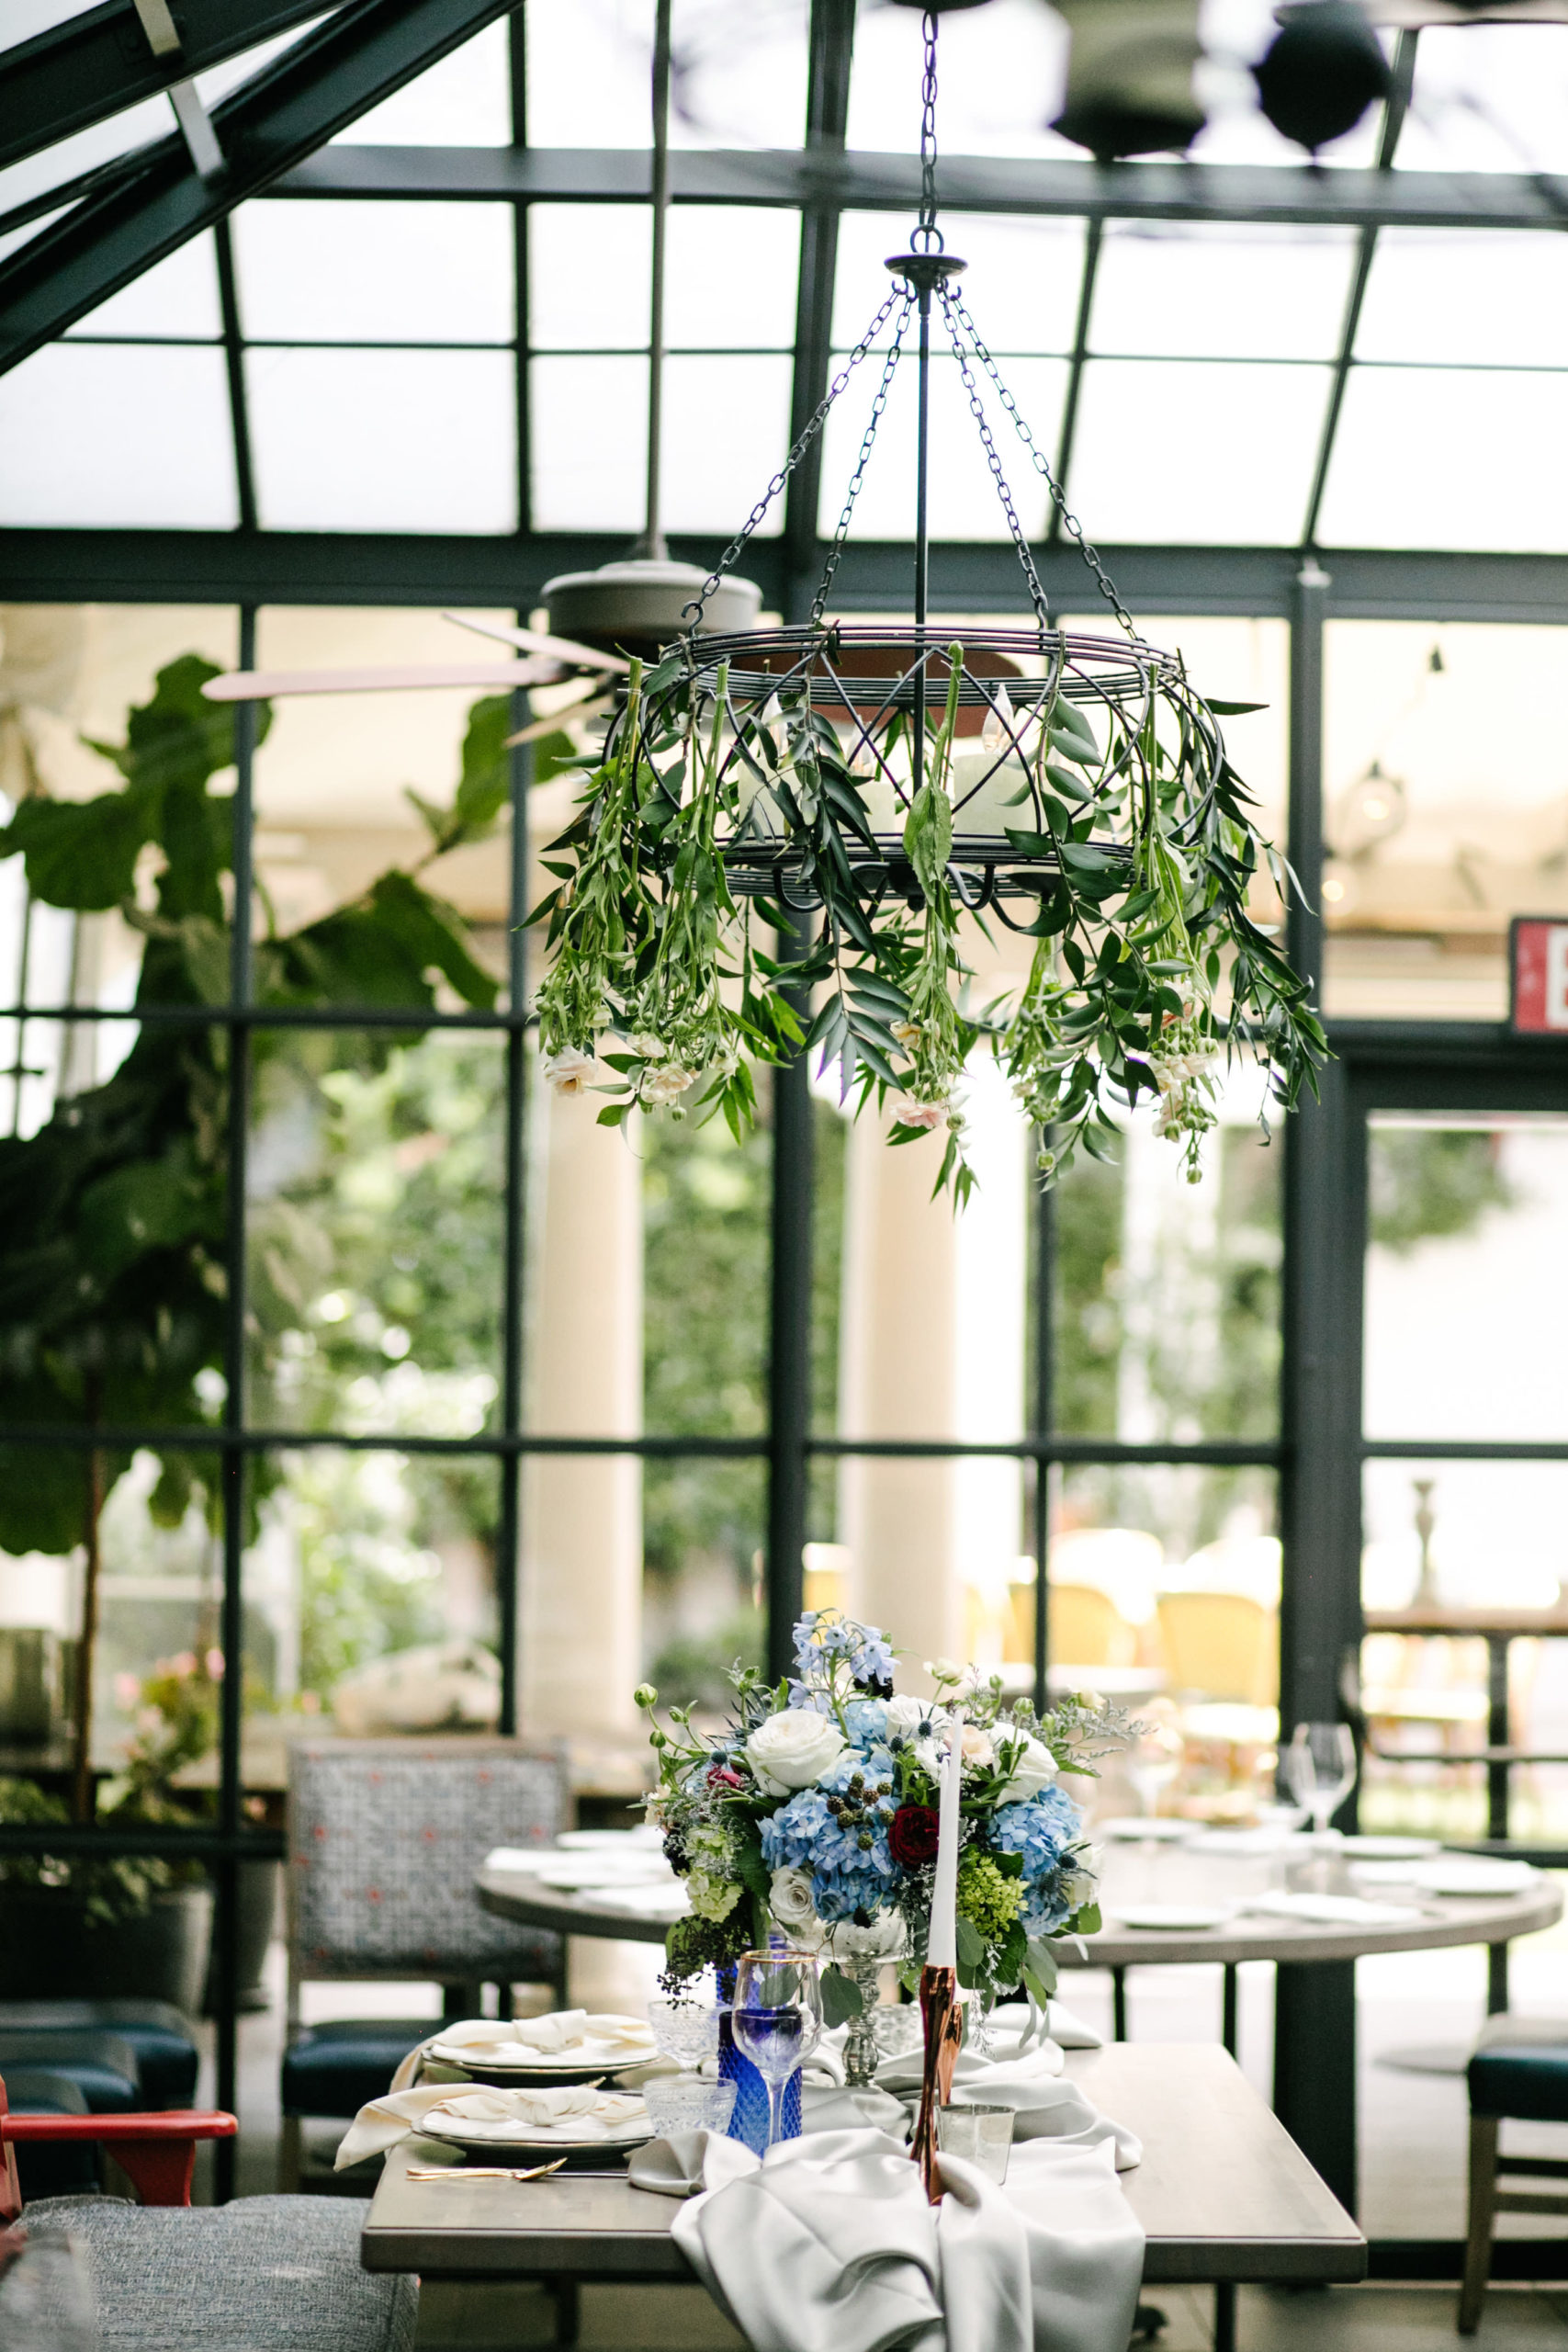 The Ultimate Wedding Guide For Five Crowns In Corona Del Mar. Reception table set up at the greenhouse.